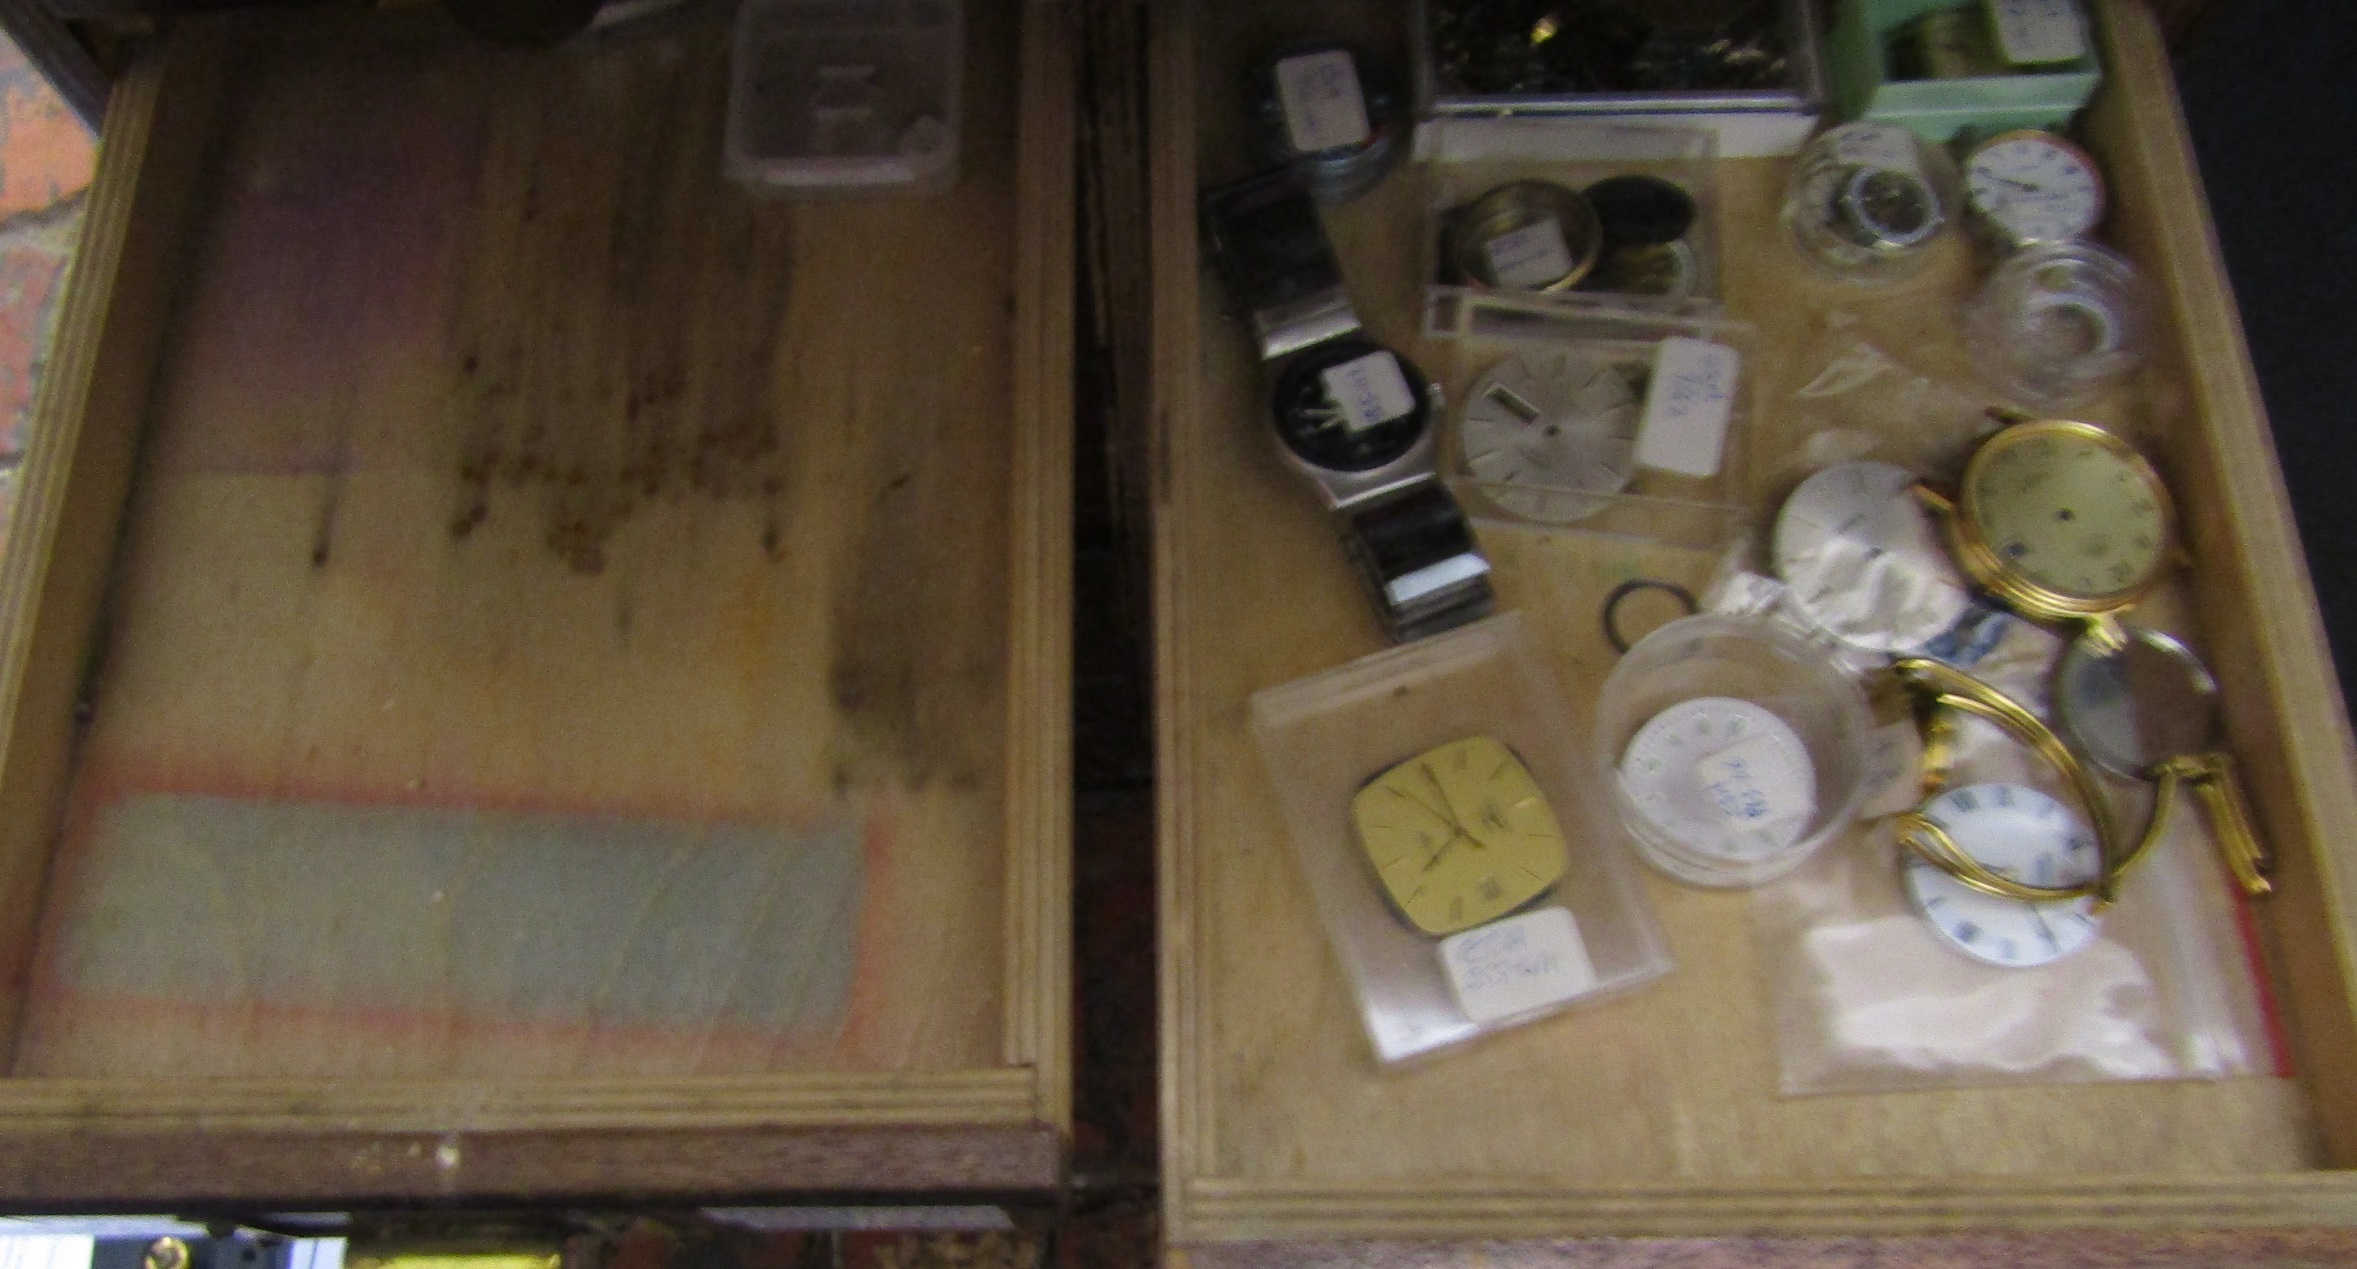 Watchmakers cabinet including mainsprings, watch movements, lathe tools, gravers, washers, - Image 6 of 11